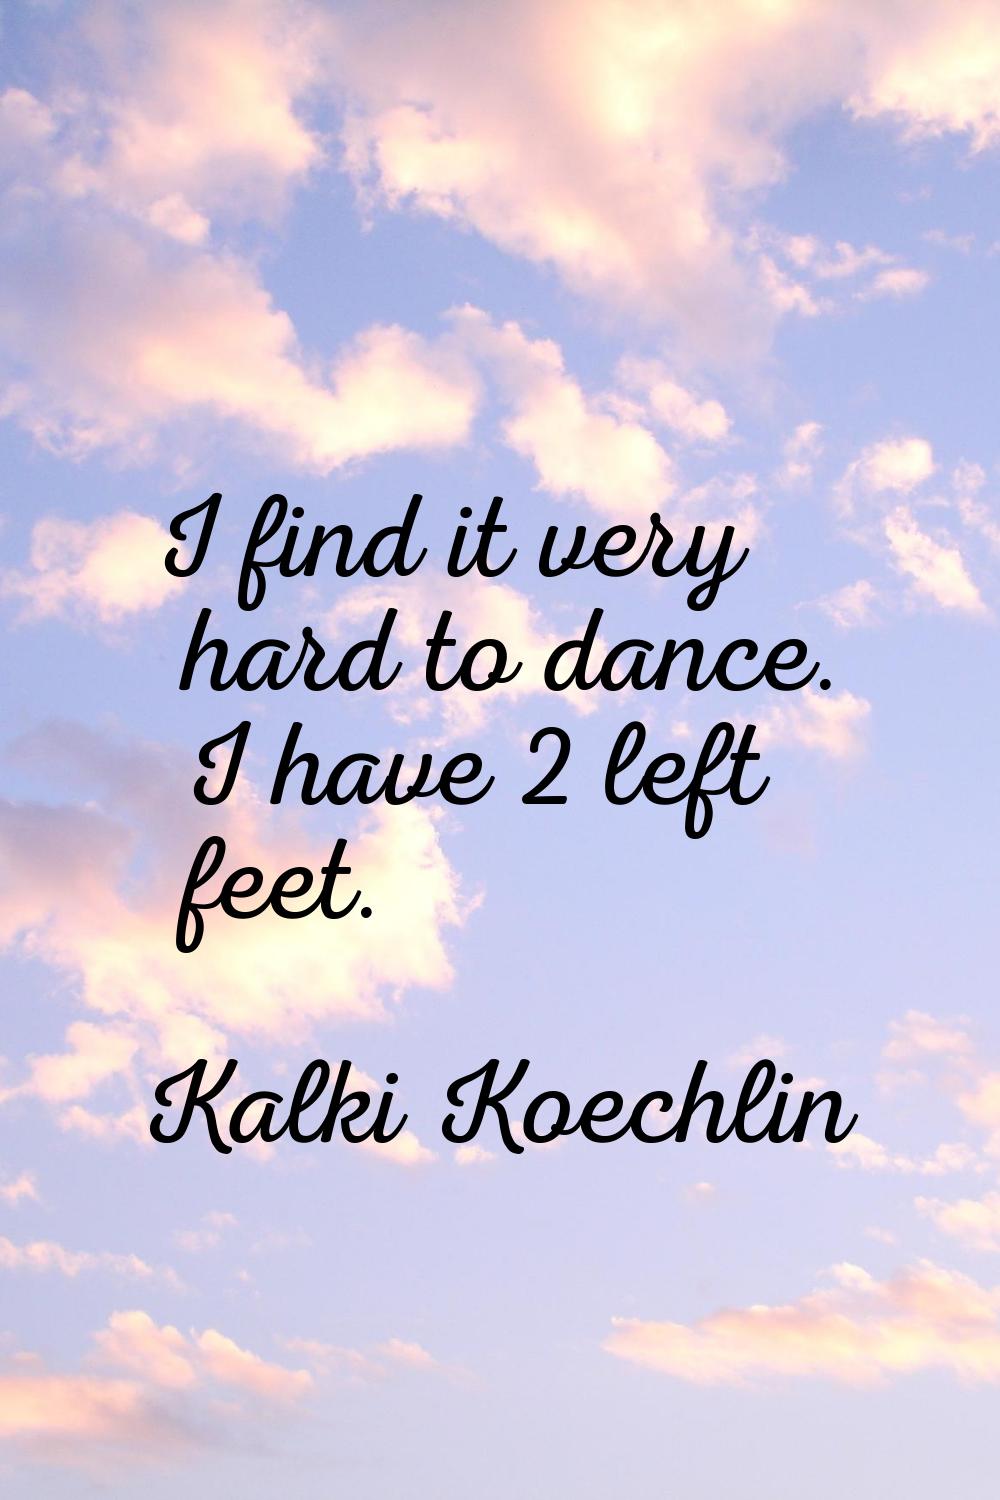 I find it very hard to dance. I have 2 left feet.